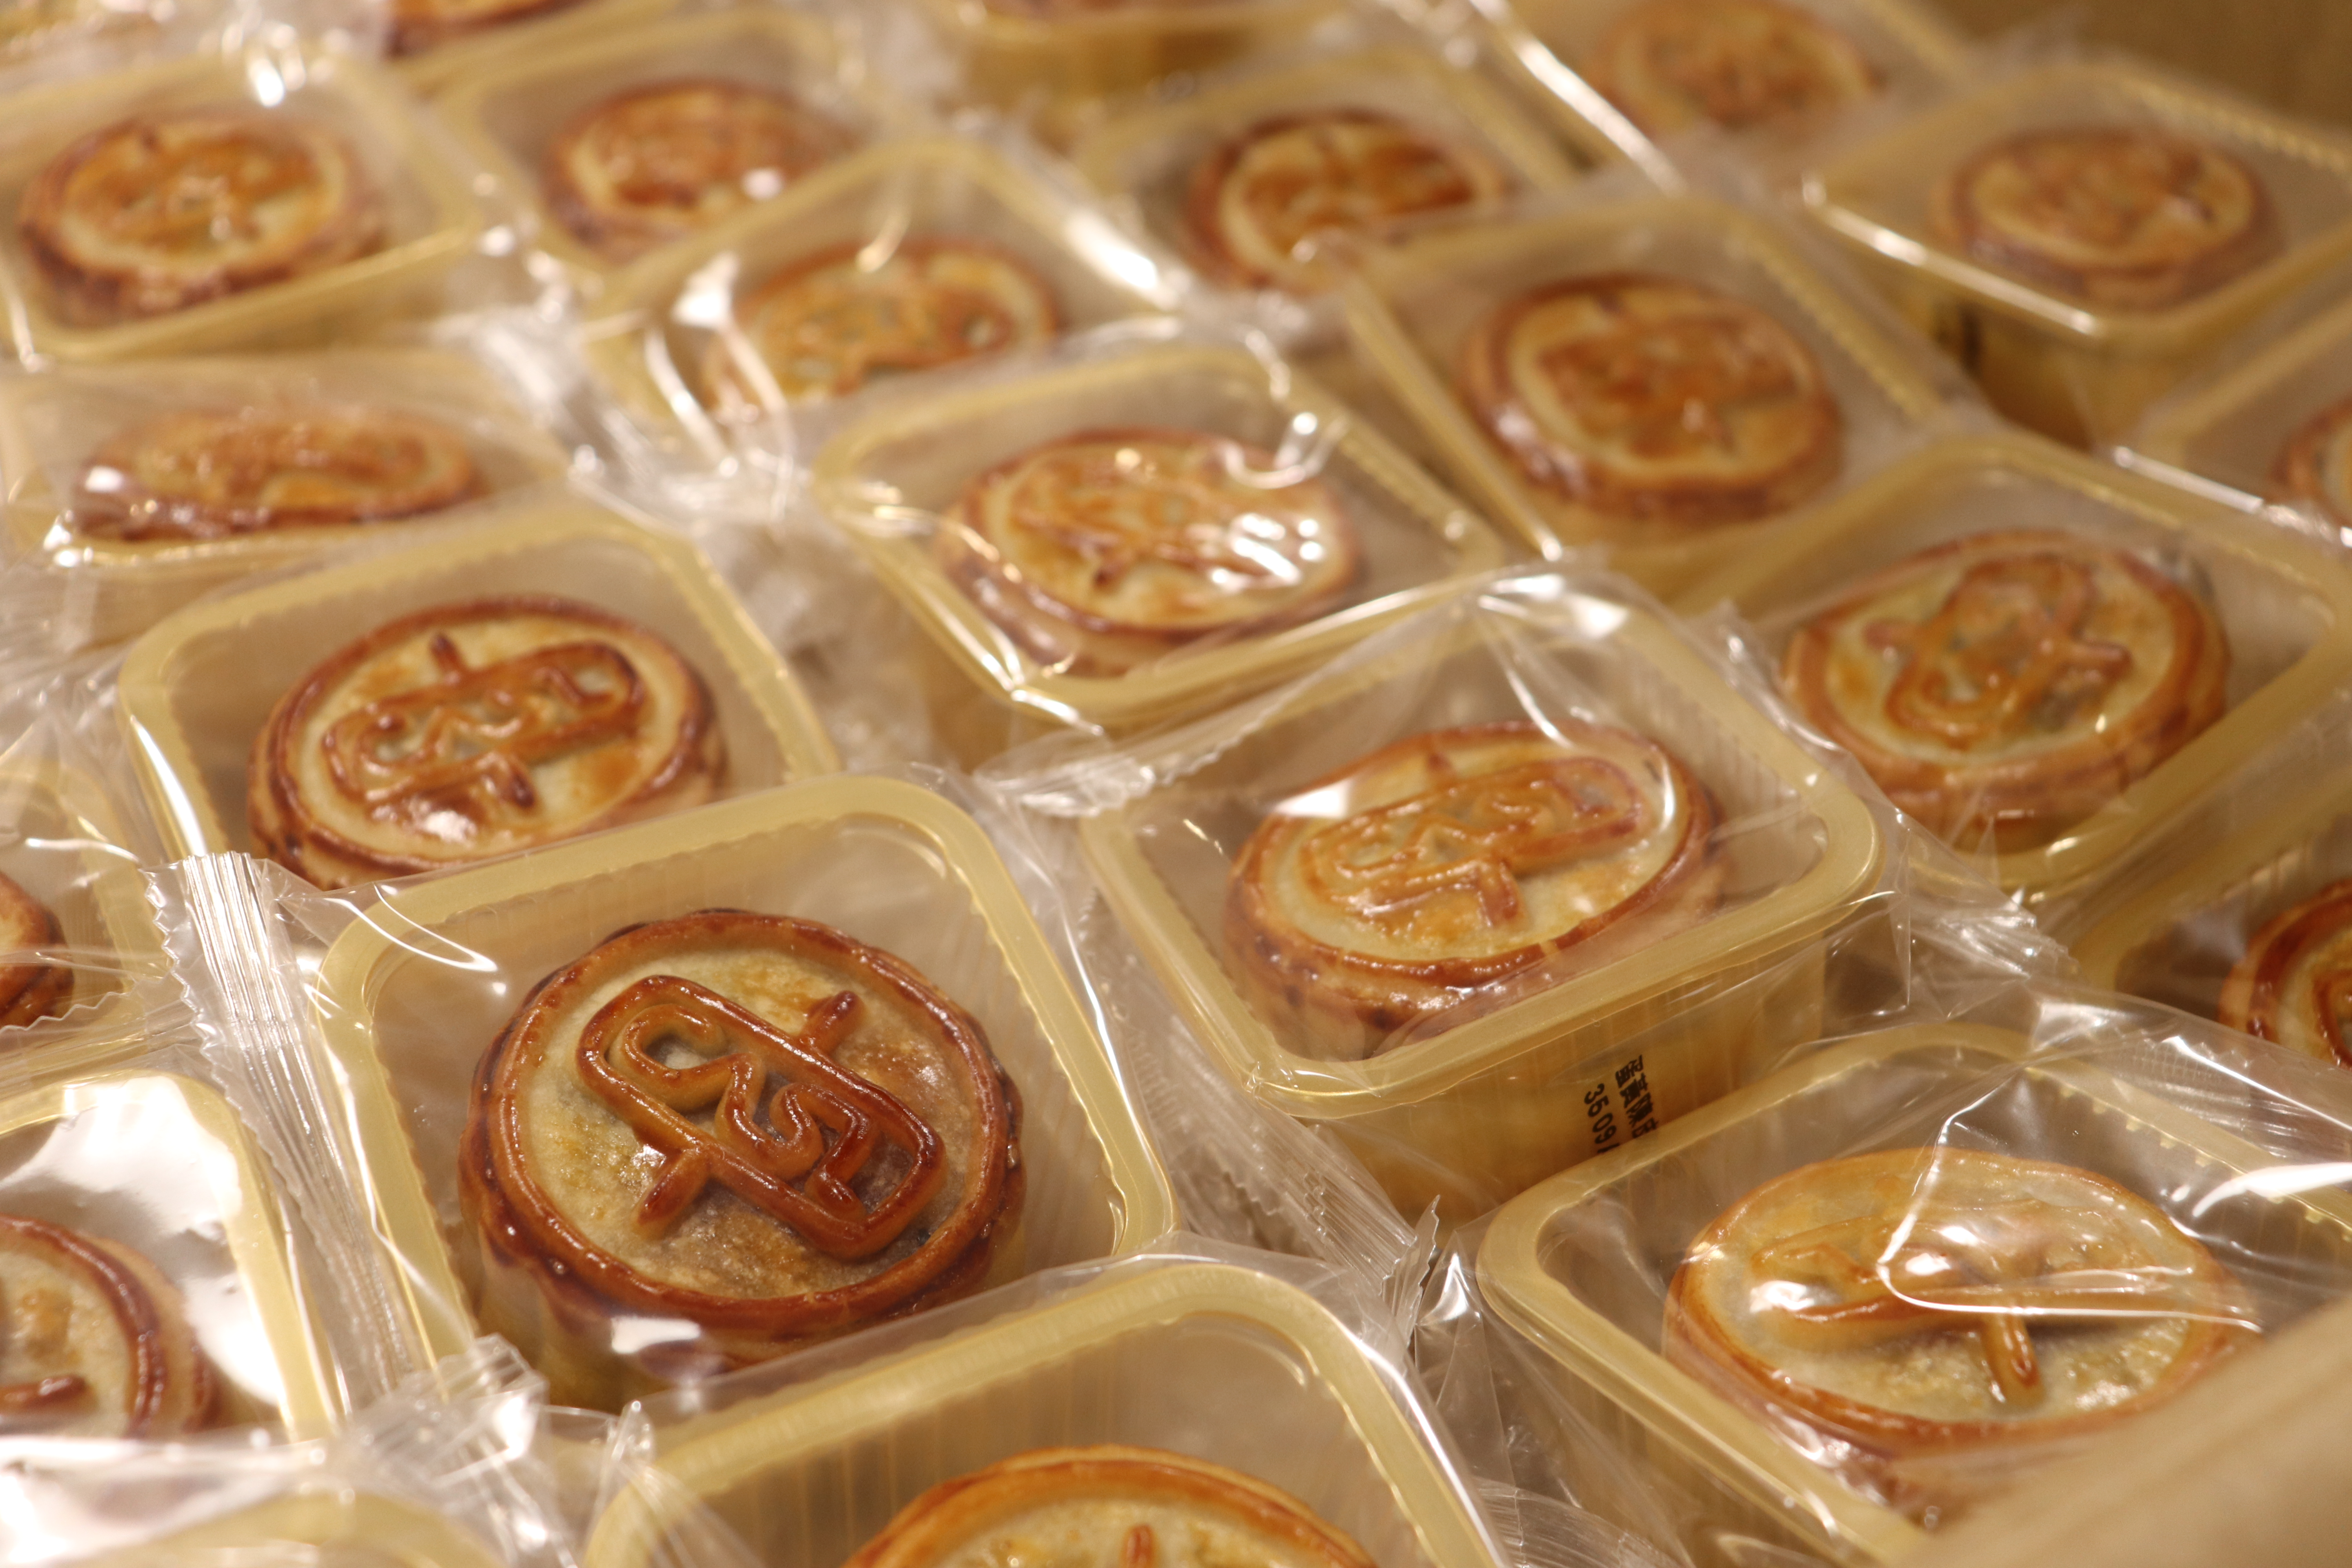 CASL gives out free mooncakes to celebrate the joyful festival